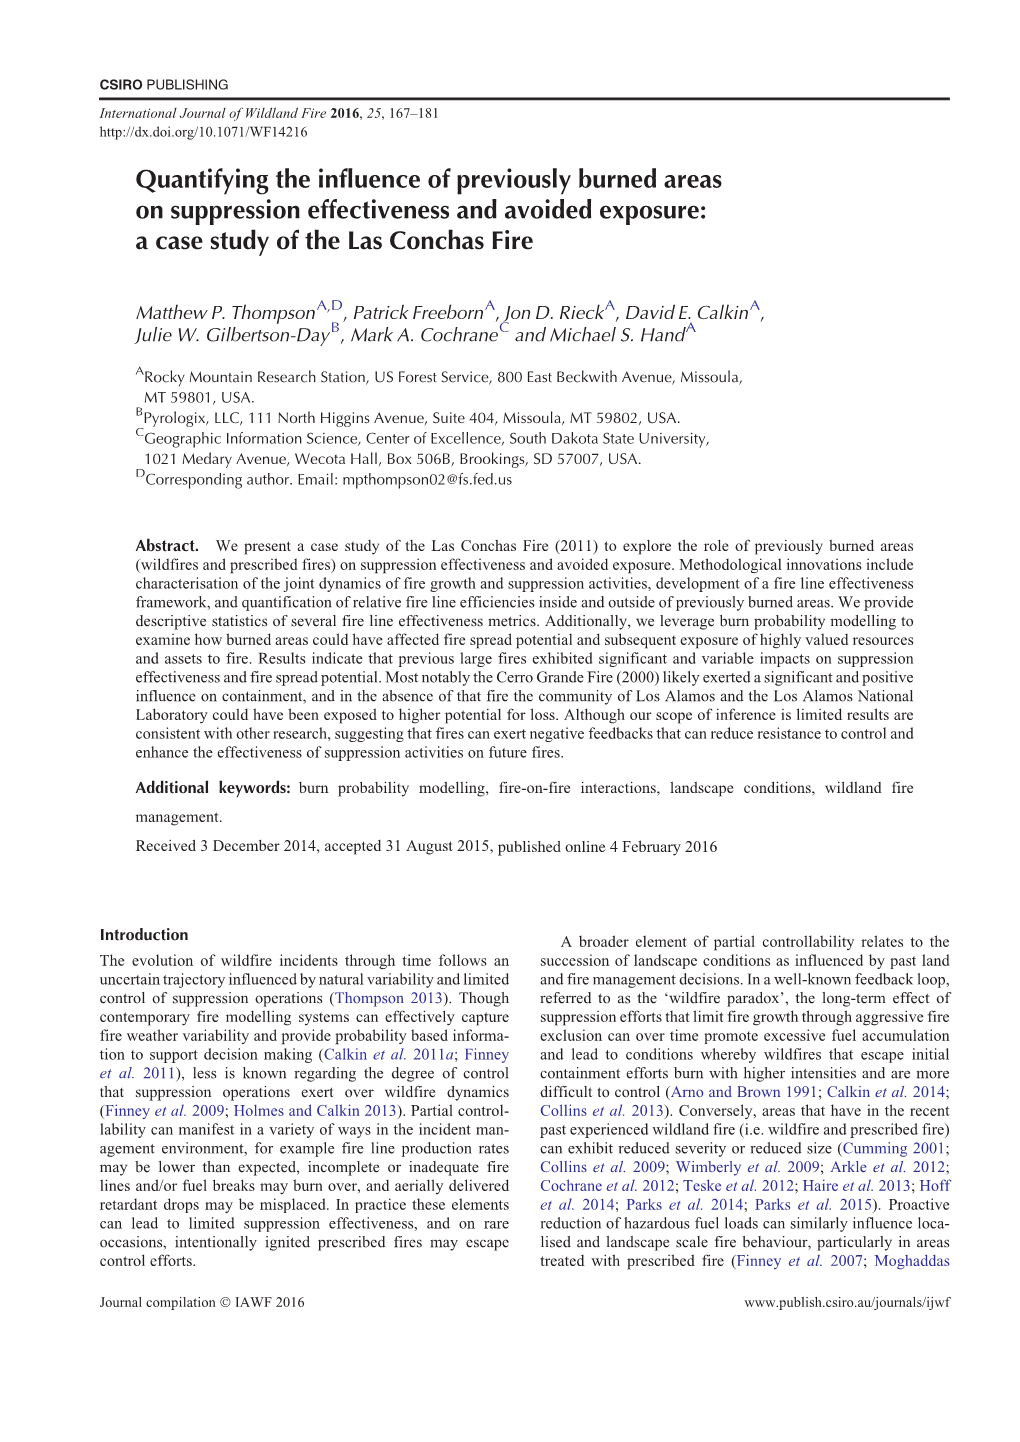 Quantifying the Influence of Previously Burned Areas on Suppression Effectiveness and Avoided Exposure: a Case Study of the Las Conchas Fire